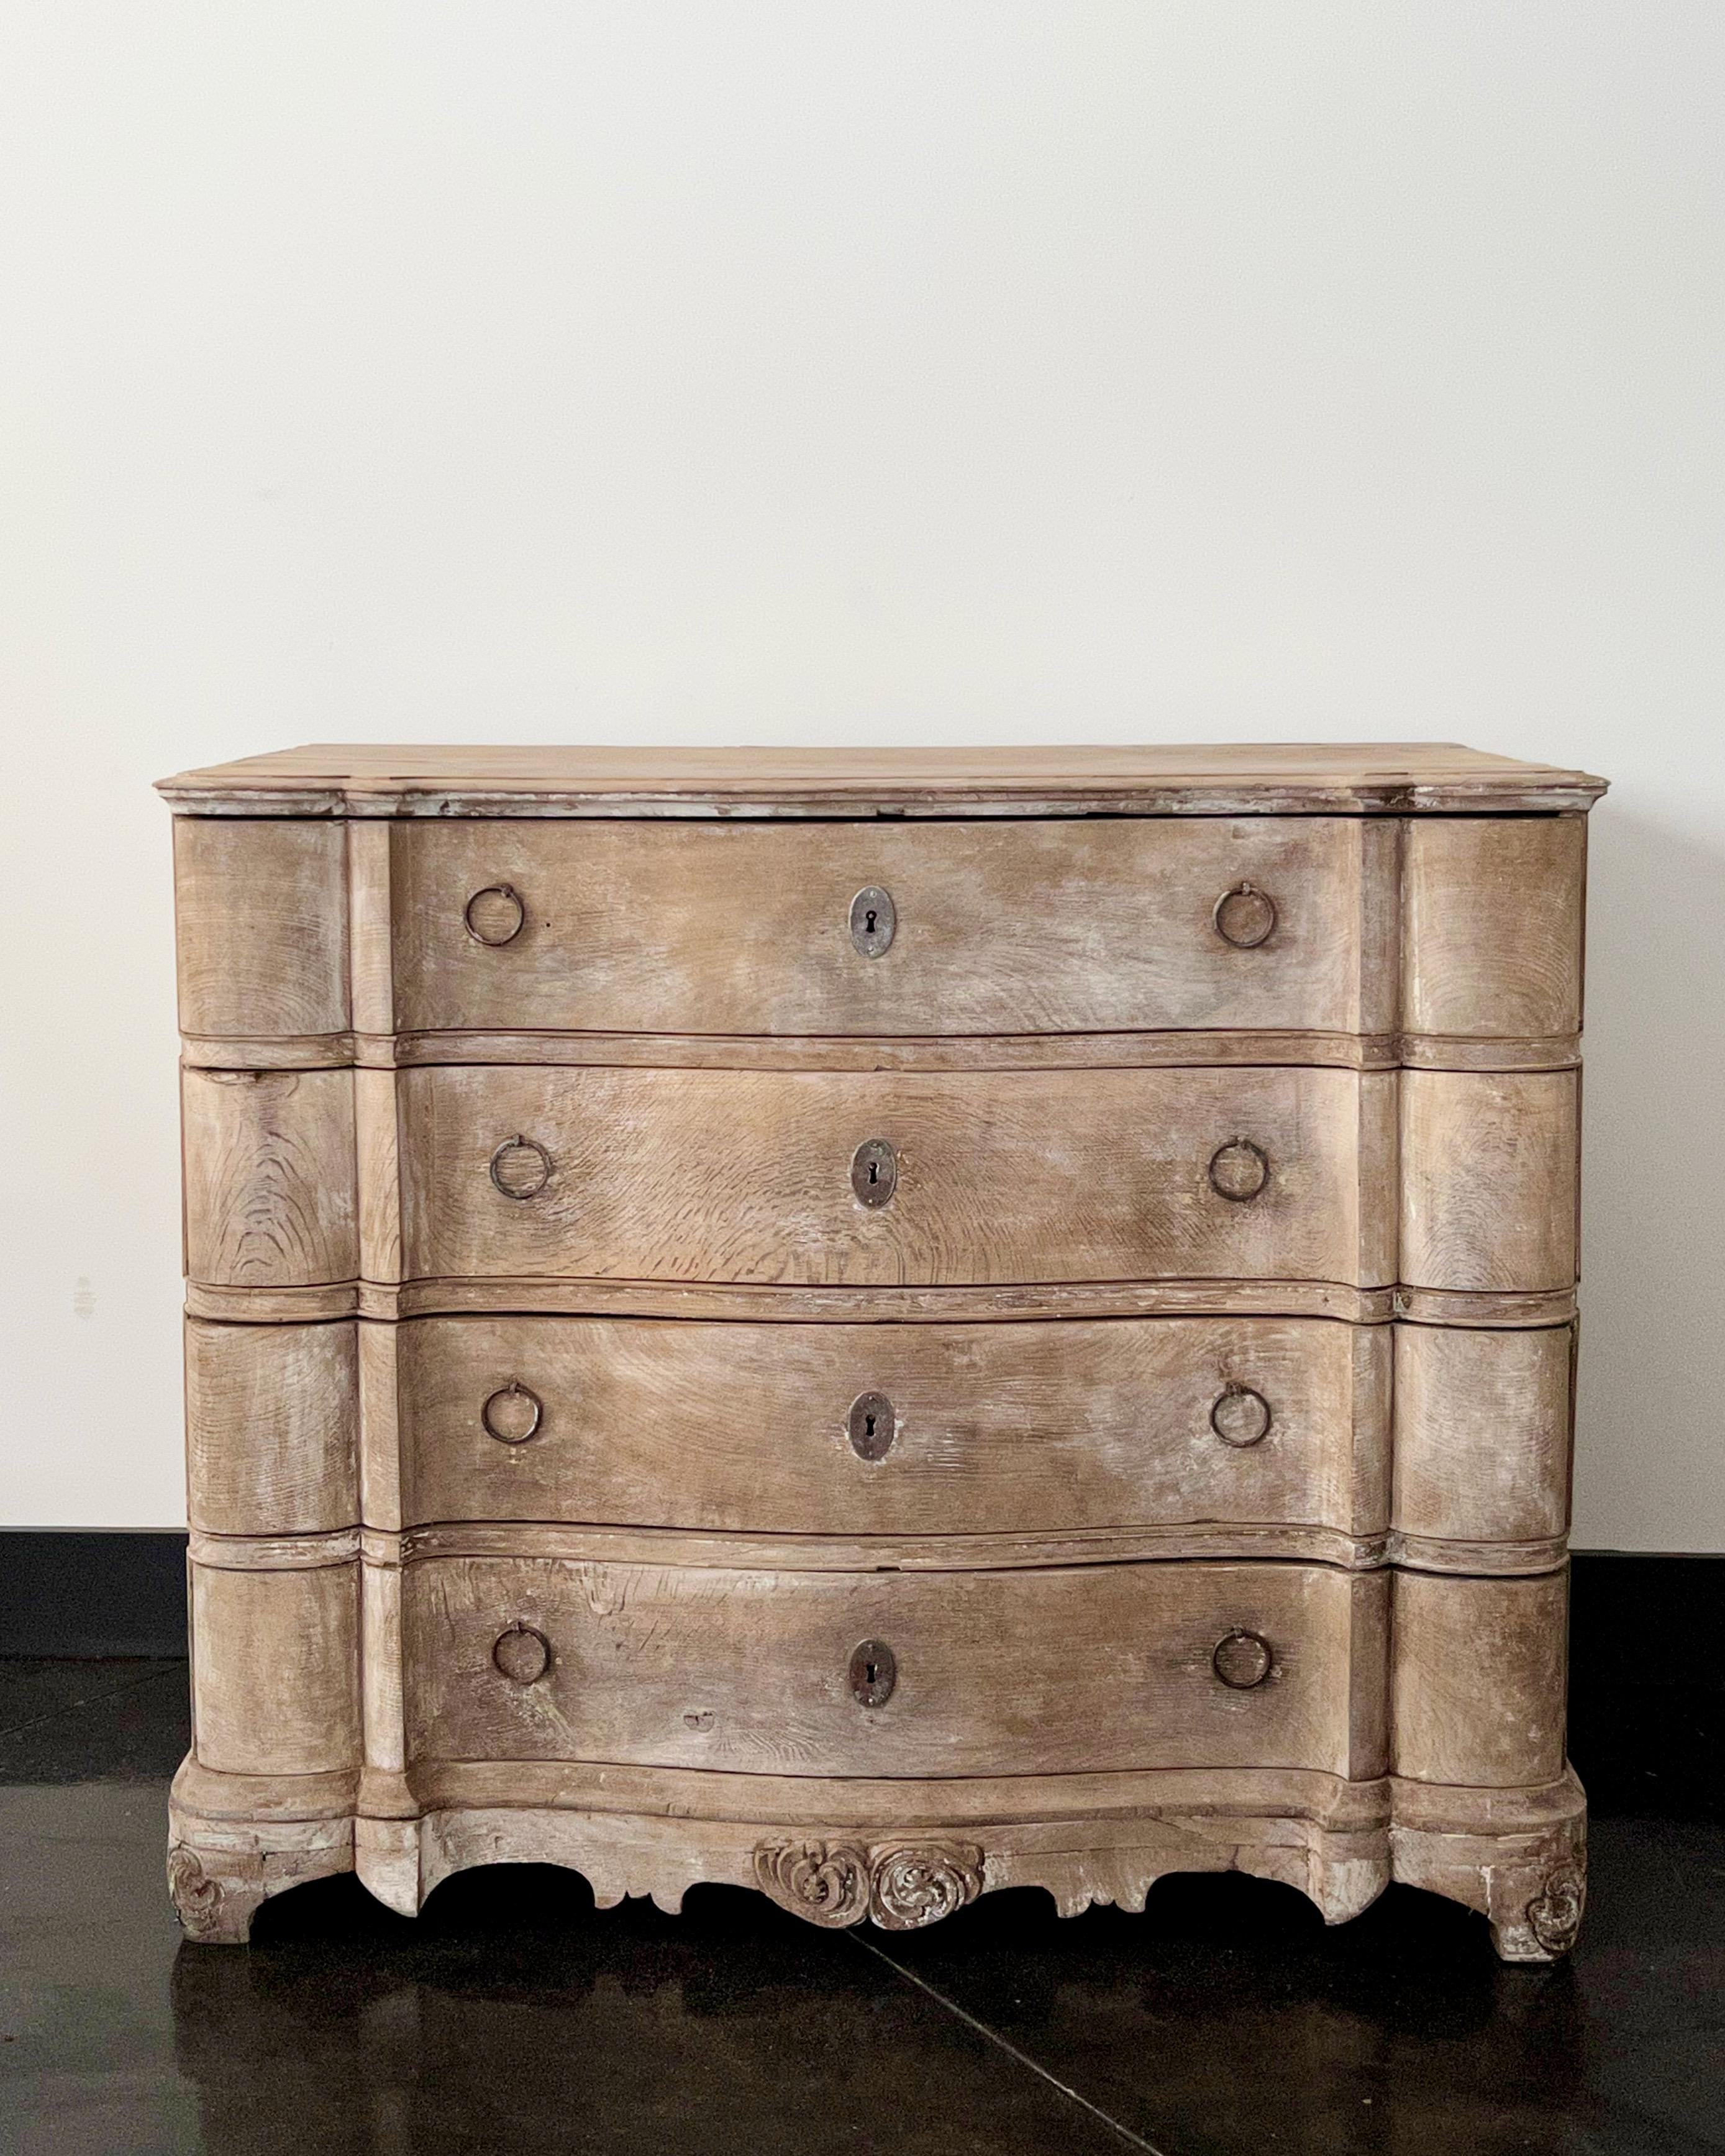 18th century four drawers Dutch chest in richly carved, bleached oak with curvaceous serpentine drawer fronts, shaped top, handsome original large iron handles on the side panels and beautifully carved apron and feet.